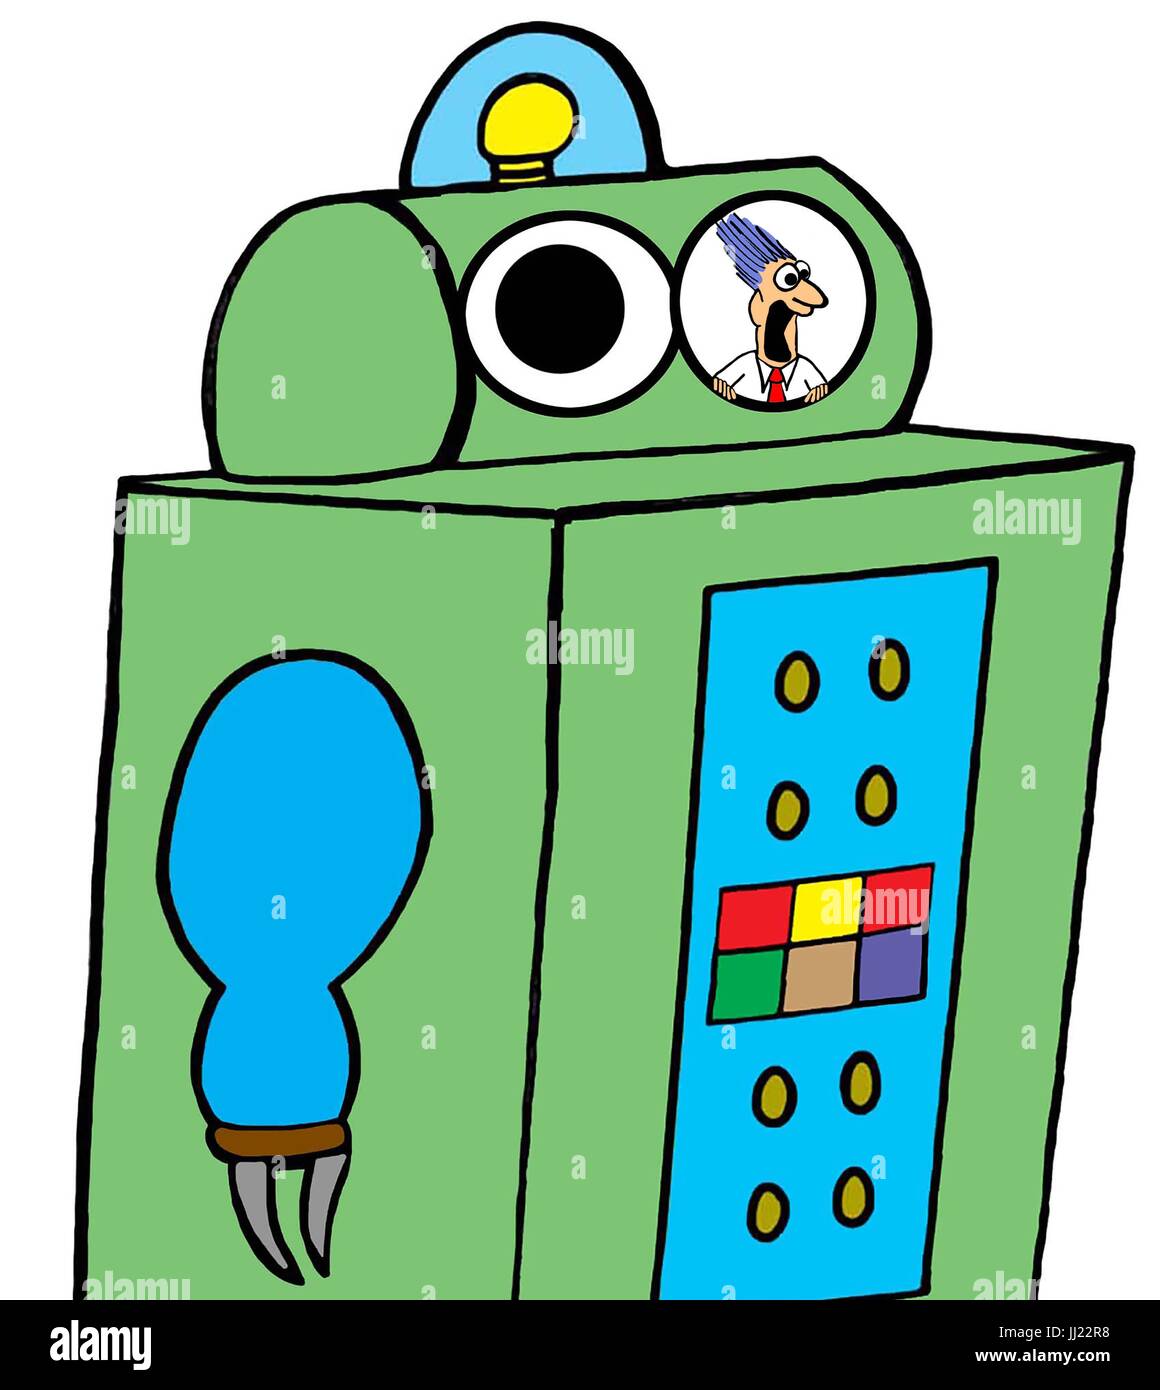 Technology cartoon illustration of a robot with a frightened worker inside of it. Stock Photo